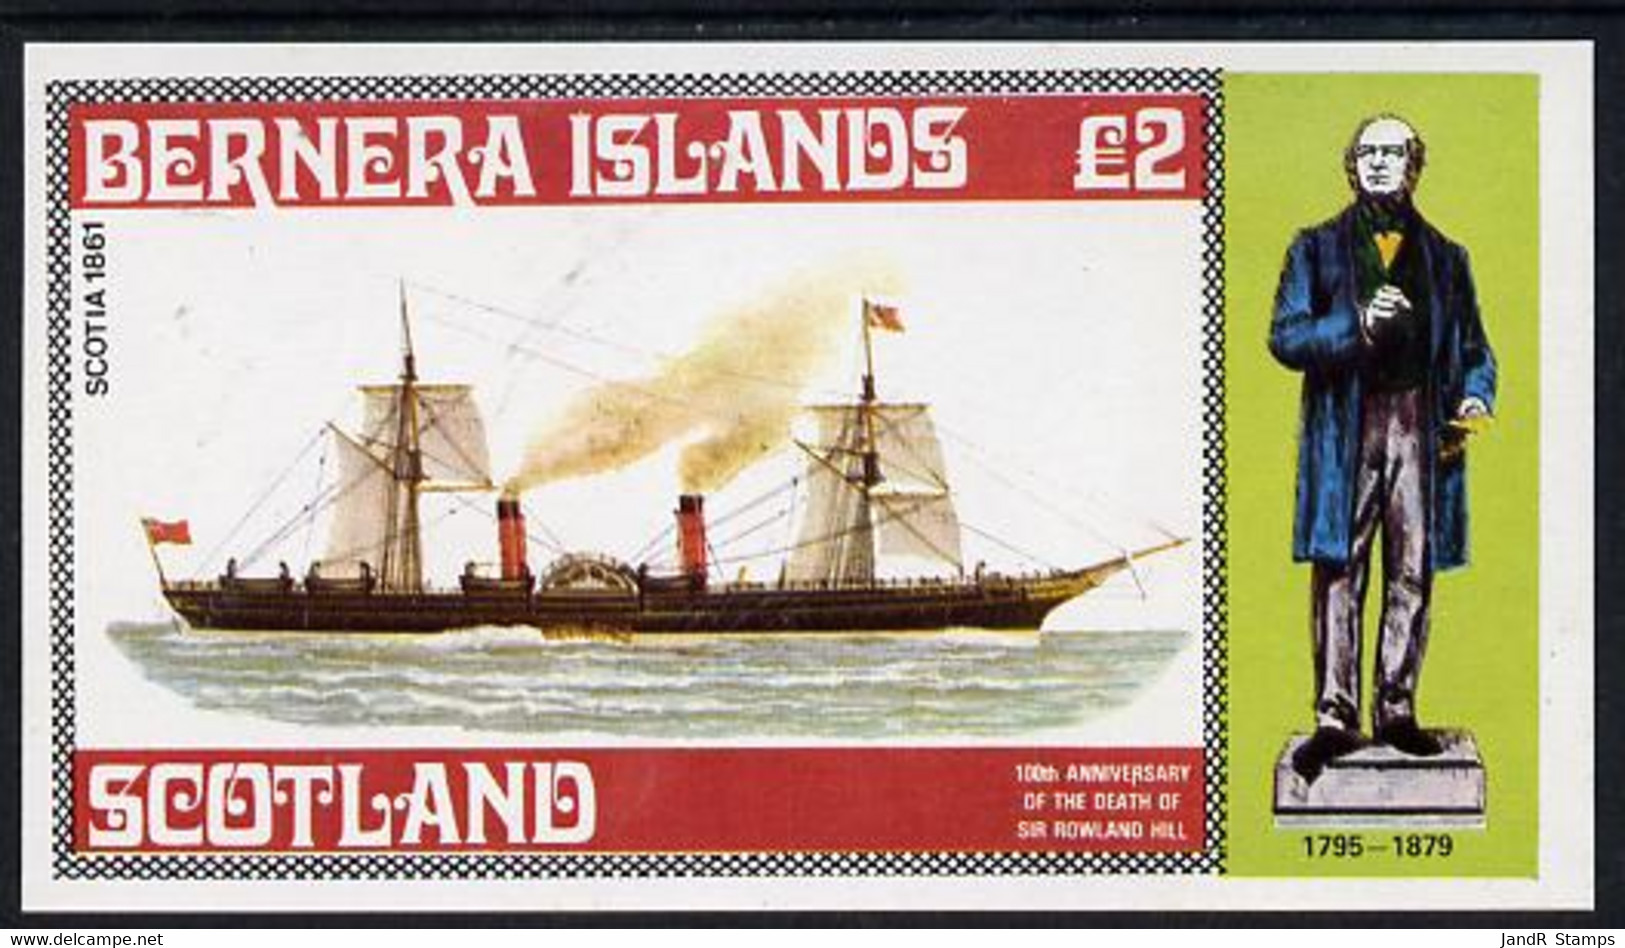 Bernera 1979 Rowland Hill (Ships - Paddle Steamer Scotia) Imperf Deluxe Sheet (�2 Value) MNH - Local Issues